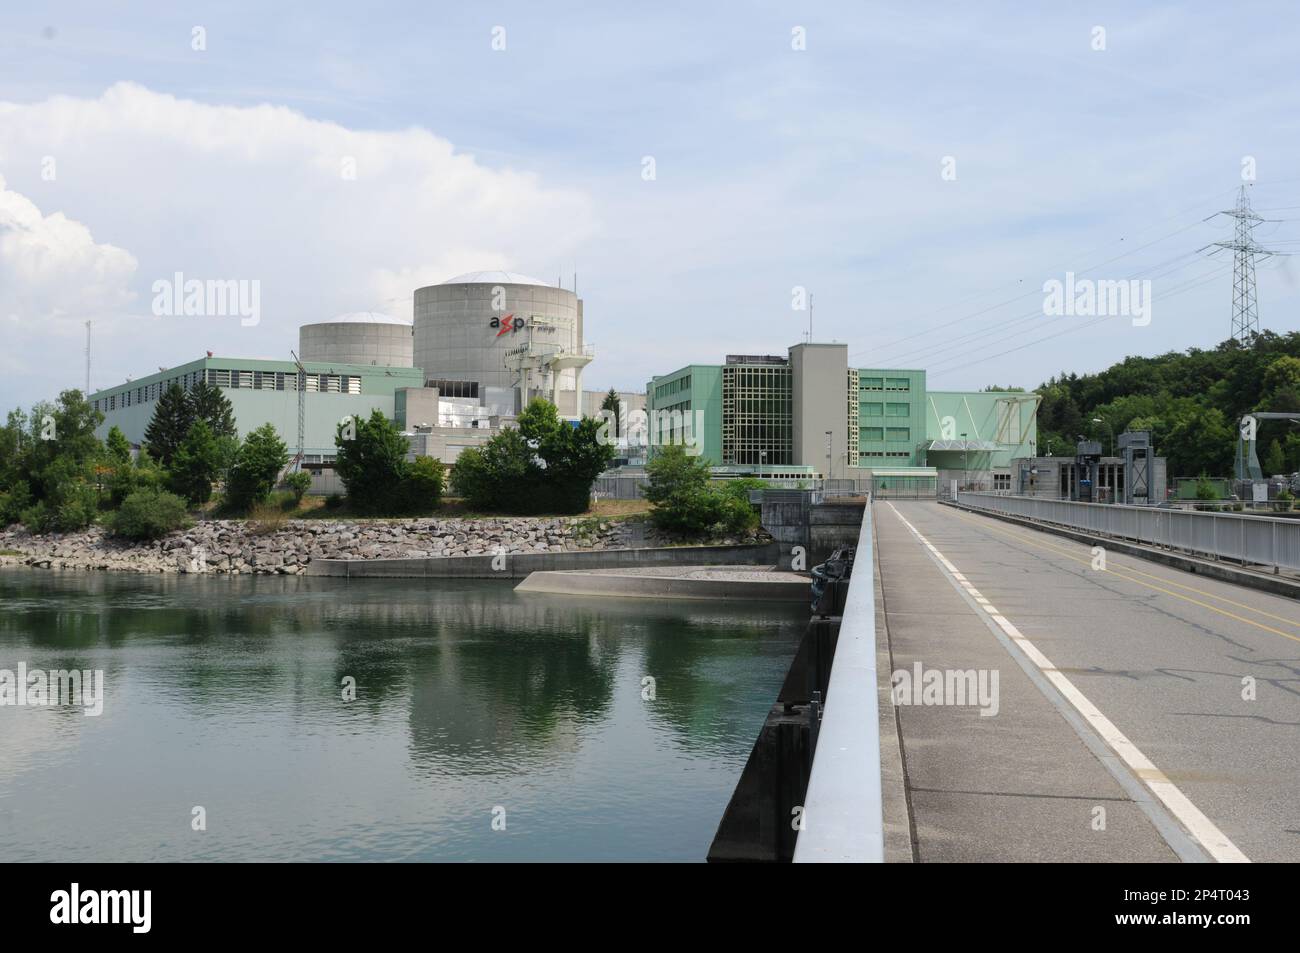 One of the oldest nuclear power station of the world: Beznau 1 + 2 in Switzerland are over 50 years old Stock Photo